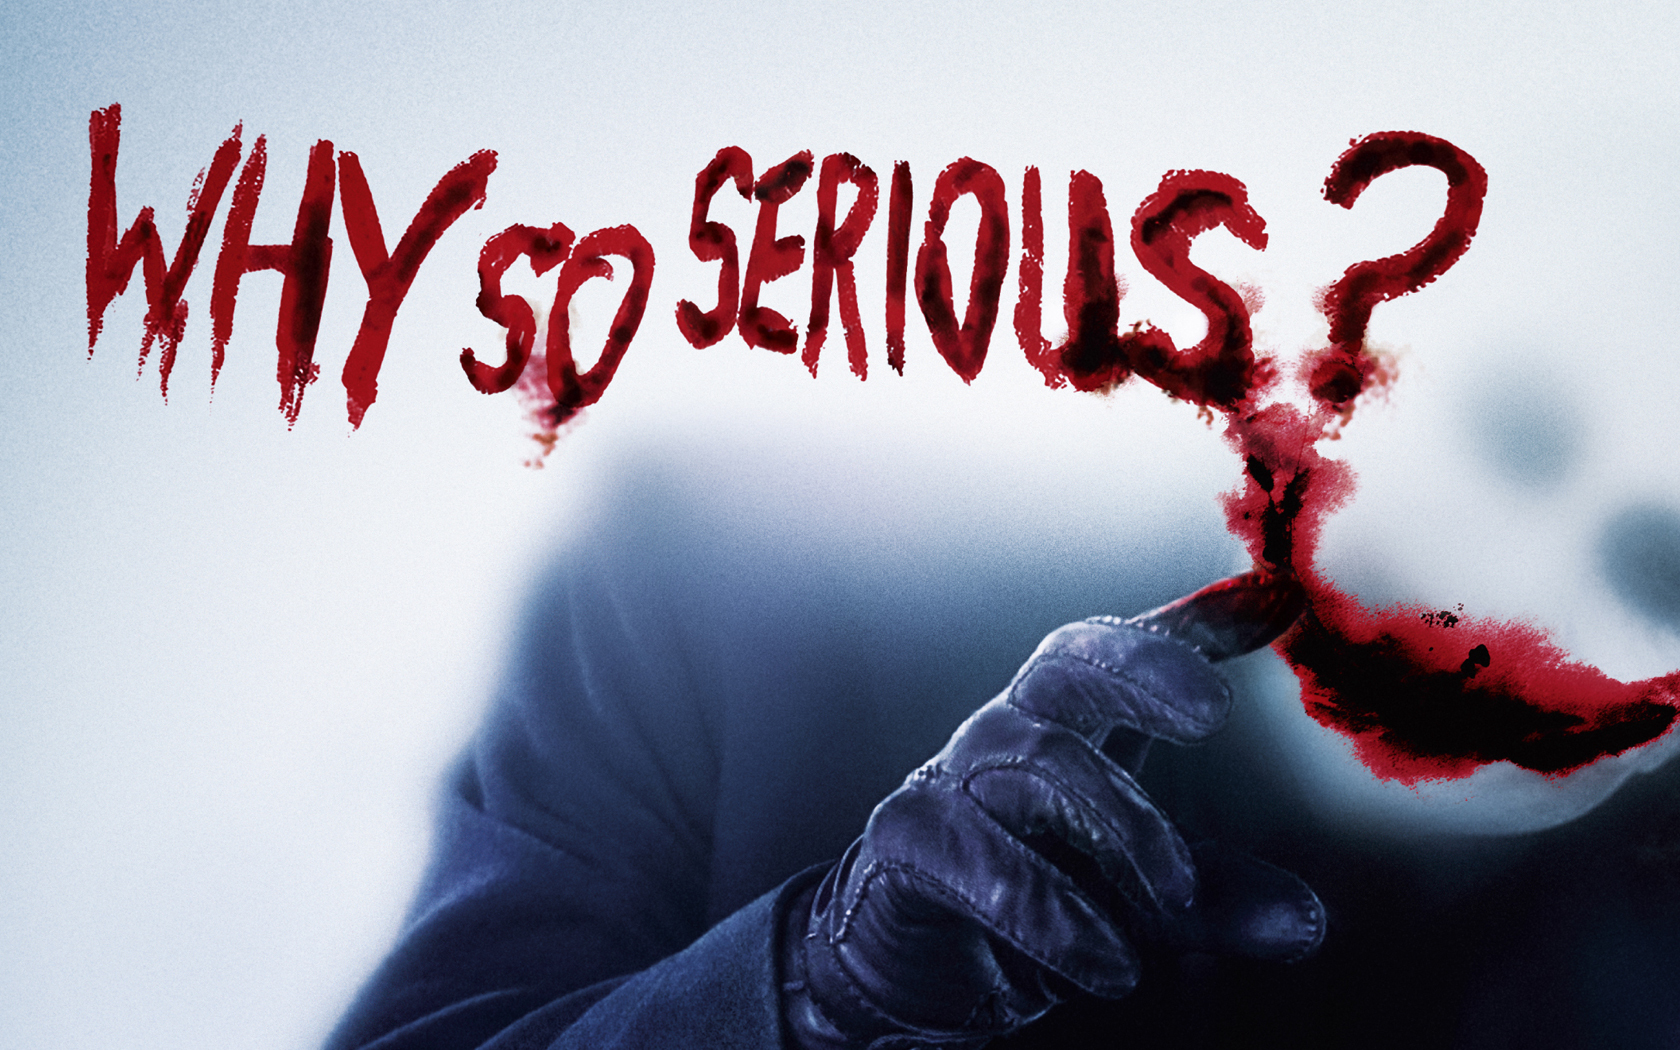 Why So Serious - You Are So Serious - HD Wallpaper 